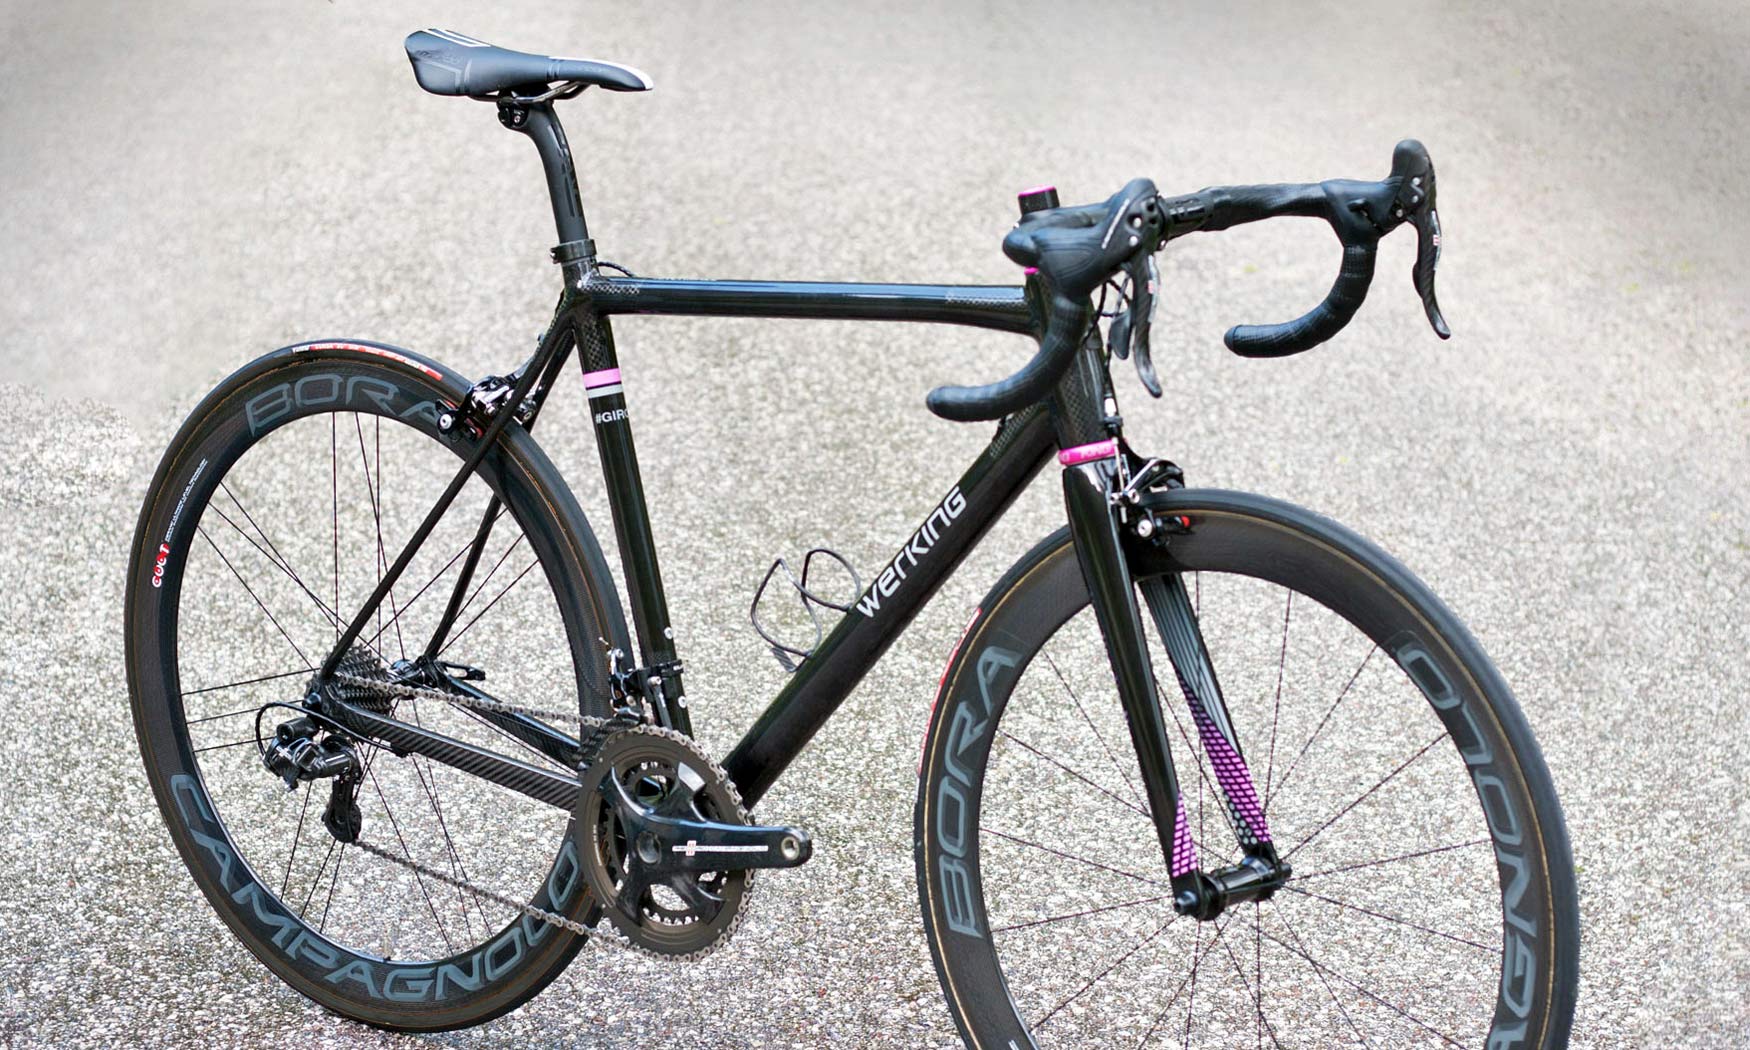 Werking carbon road bike goes Anormale, Alpitude Wahoo out-front mount & more!